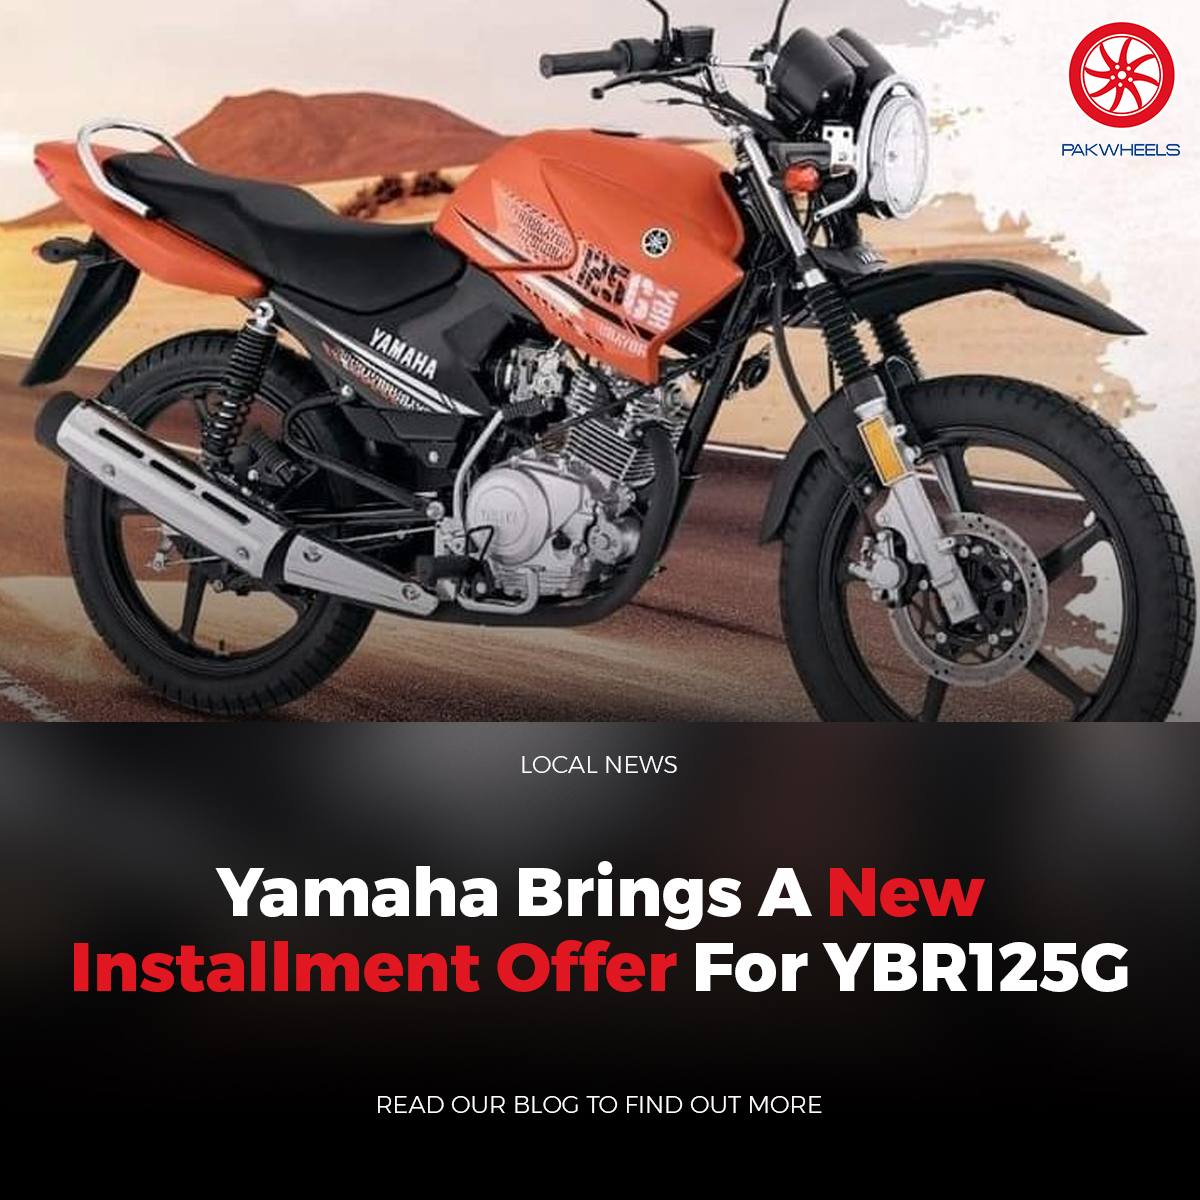 Since the inception of this year, bike and car manufacturers have a single roll, roll of announcing enticing offers one after the other.

Read the blog: ow.ly/uMKl50QGAzZ

#PakWheels #PWBlog #Yamaha #YBR125g #InstallmentOffer